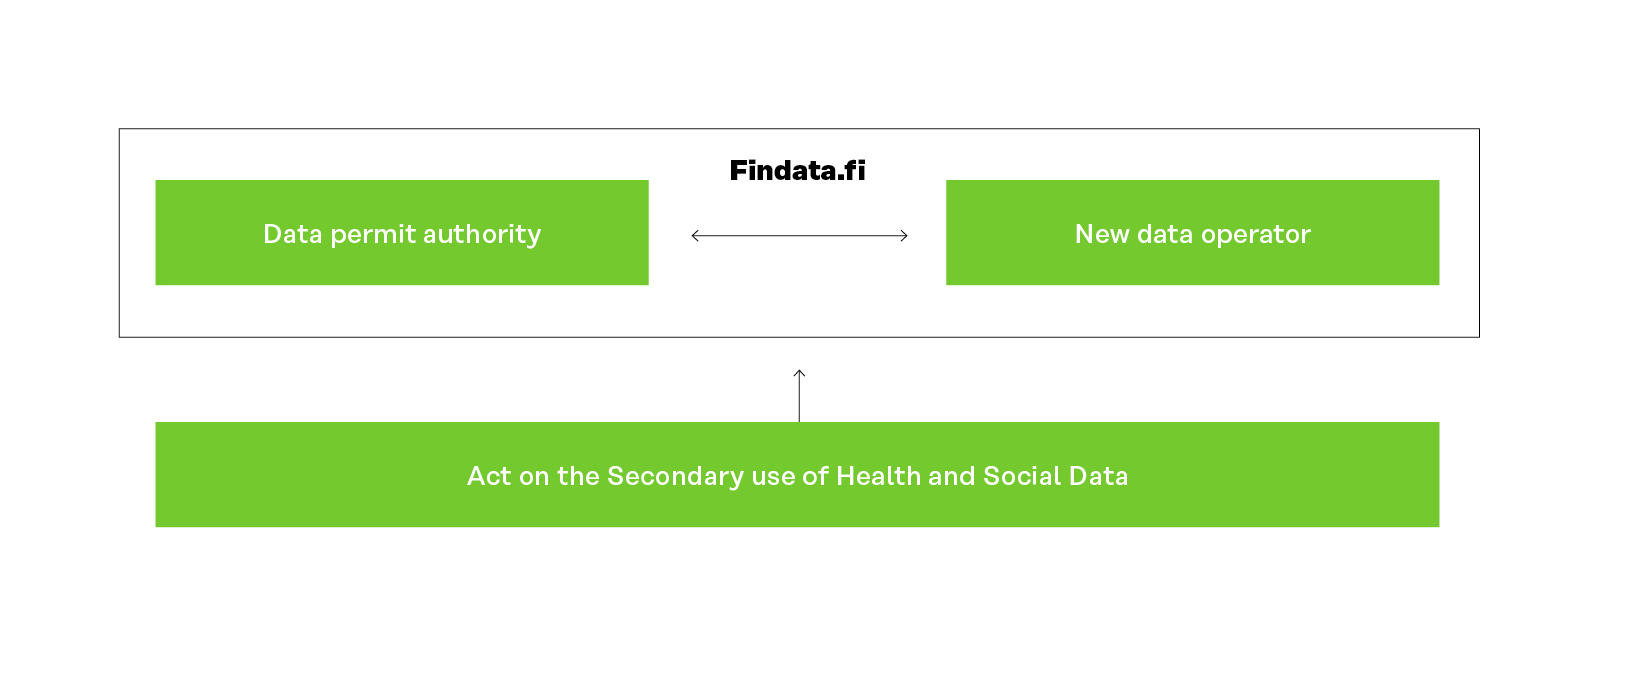 New act enables secondary use of health data. Findata.fi will be the permit authority and new data operator.